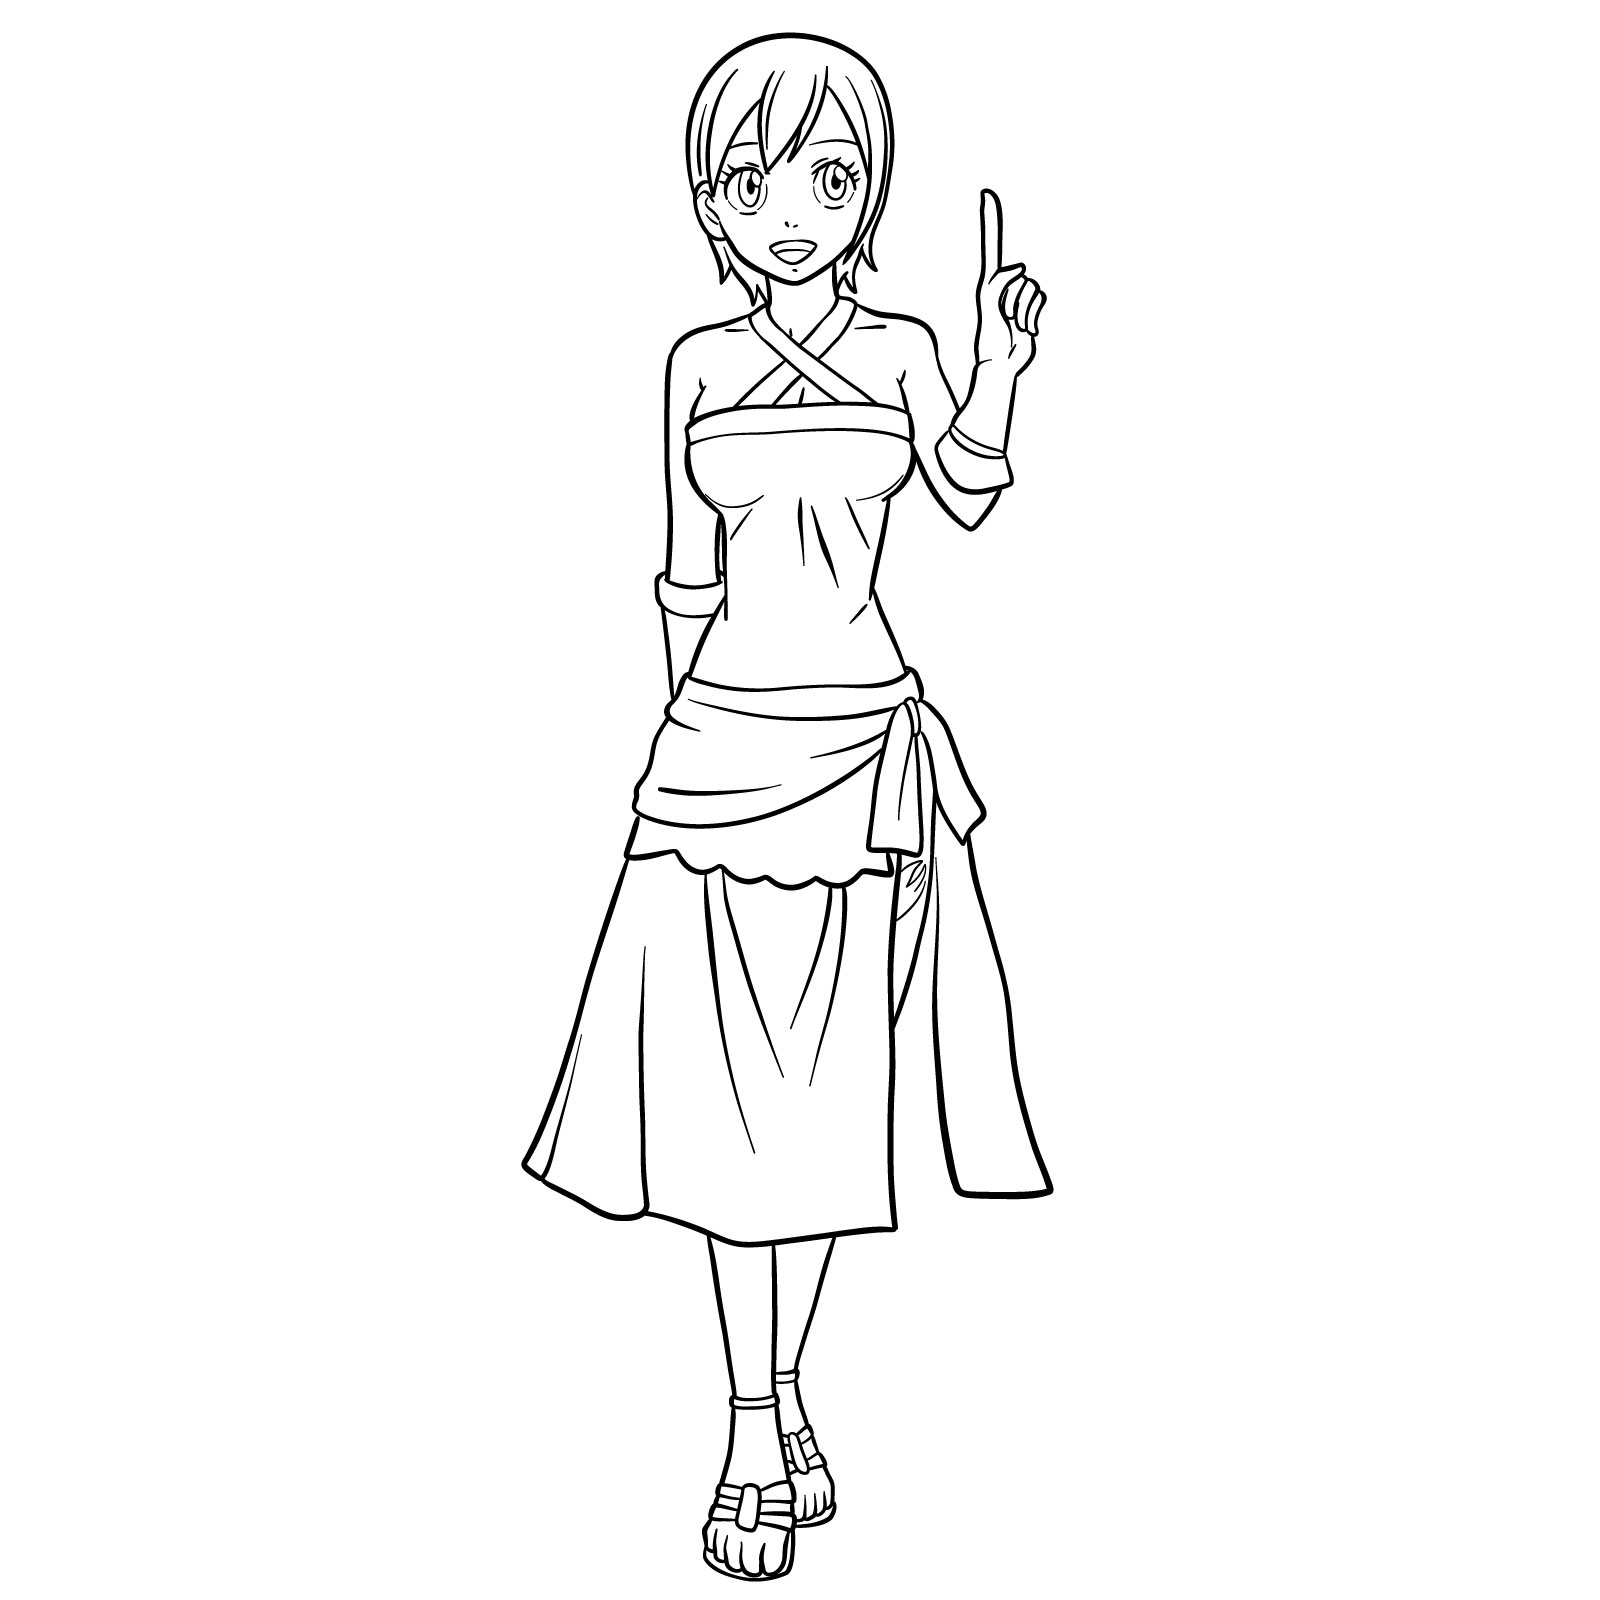 How to draw Lisanna Strauss from Fairy Tail - final step